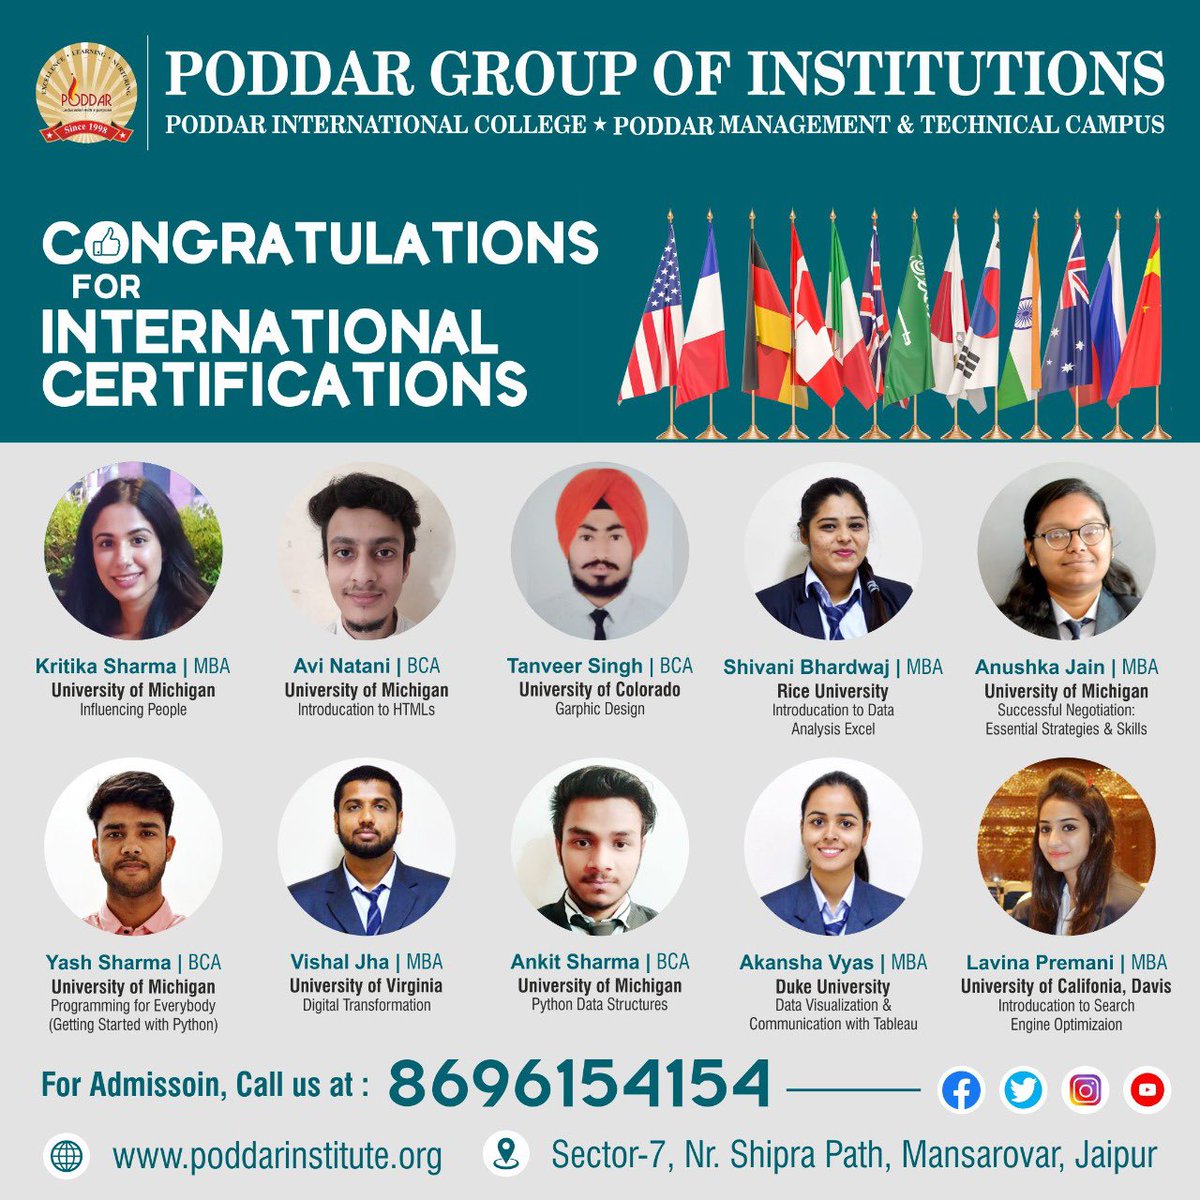 To bridge the gap between the academic and industry need, we offer many Value added courses to our students.
#internationalcertification #internationalcourses #valueaddedcourses #skilldevelopment #studentsachievement #valueadded #addons #mba #mca #bba #BCA #bestcollege #jaipur